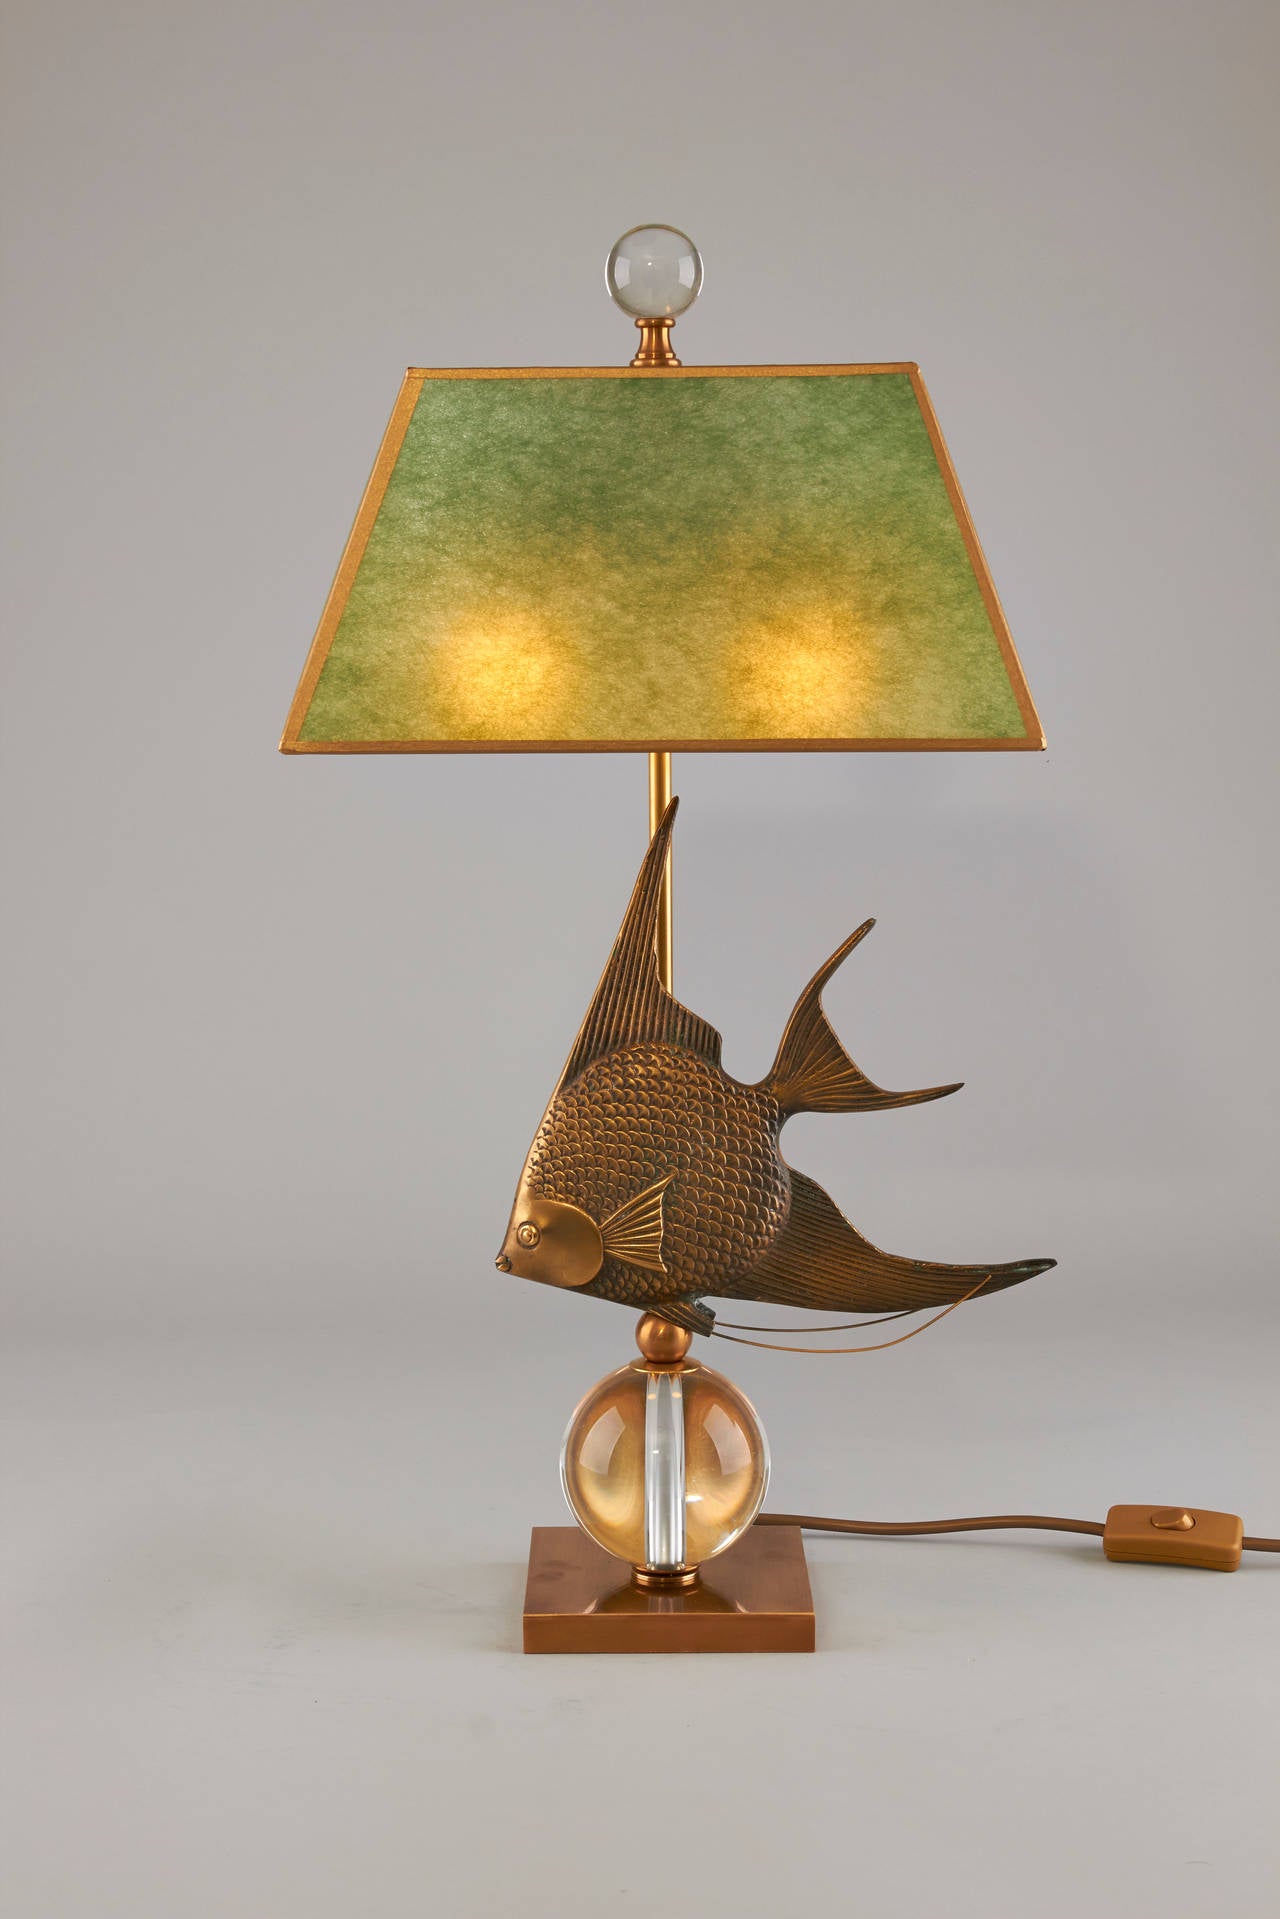 Unusual pair of table lamps. Mid-Century brass angel fish on a crystal ball.
One of a kind. Shade marbled paper.